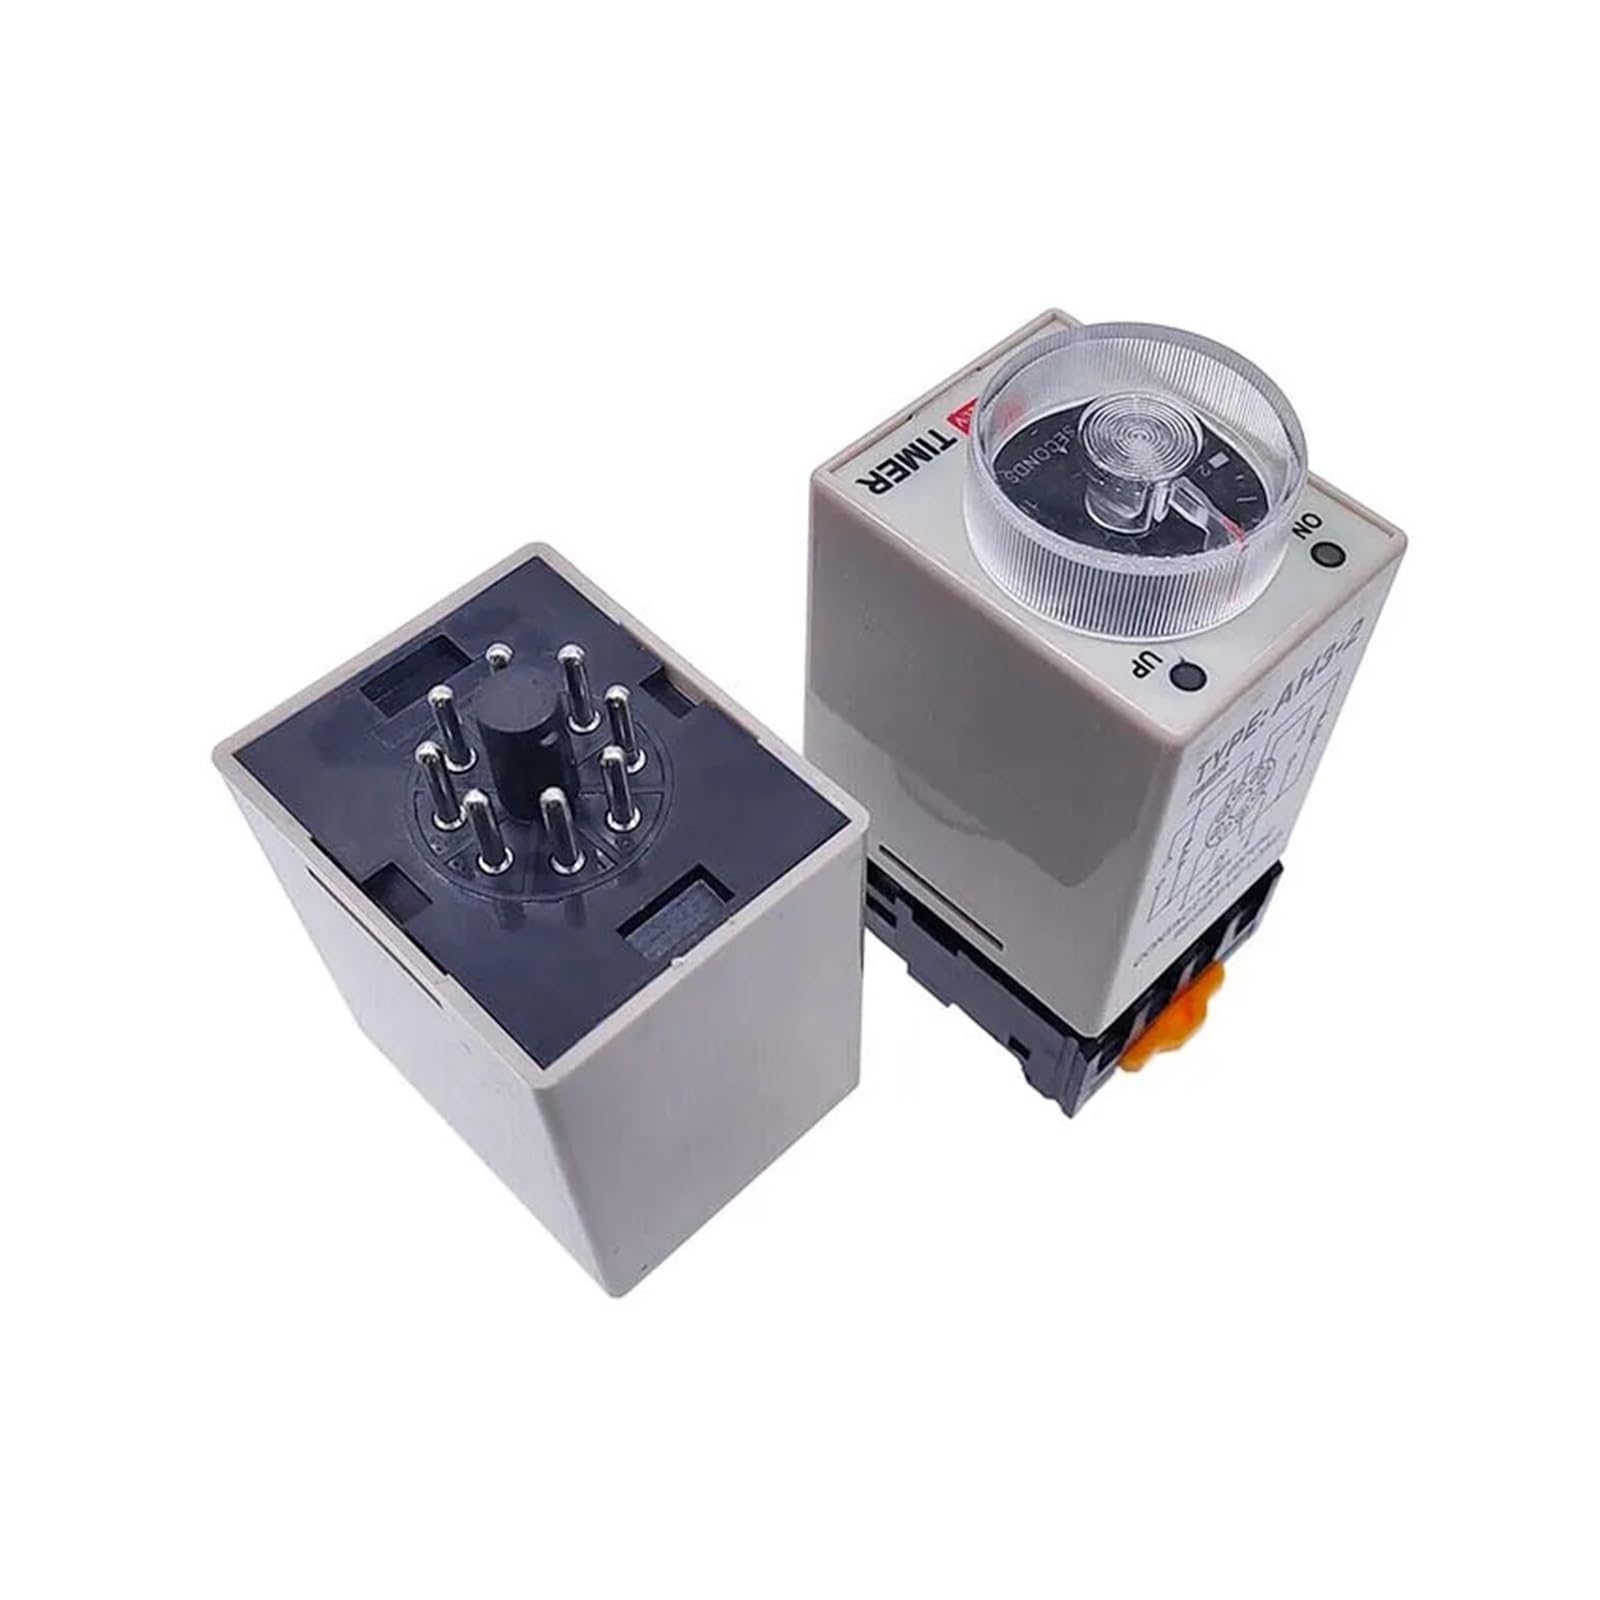 1 PC AH3-2 Power-on Delay Timer AH3-3 Time Relay AC Thick Stitch Time Set Range 1S/5S/10S/30S/60S/5M/10M/30M NWPNLXEA(AC110V,AH3-2 0-6Minutes) von NWPNLXEA